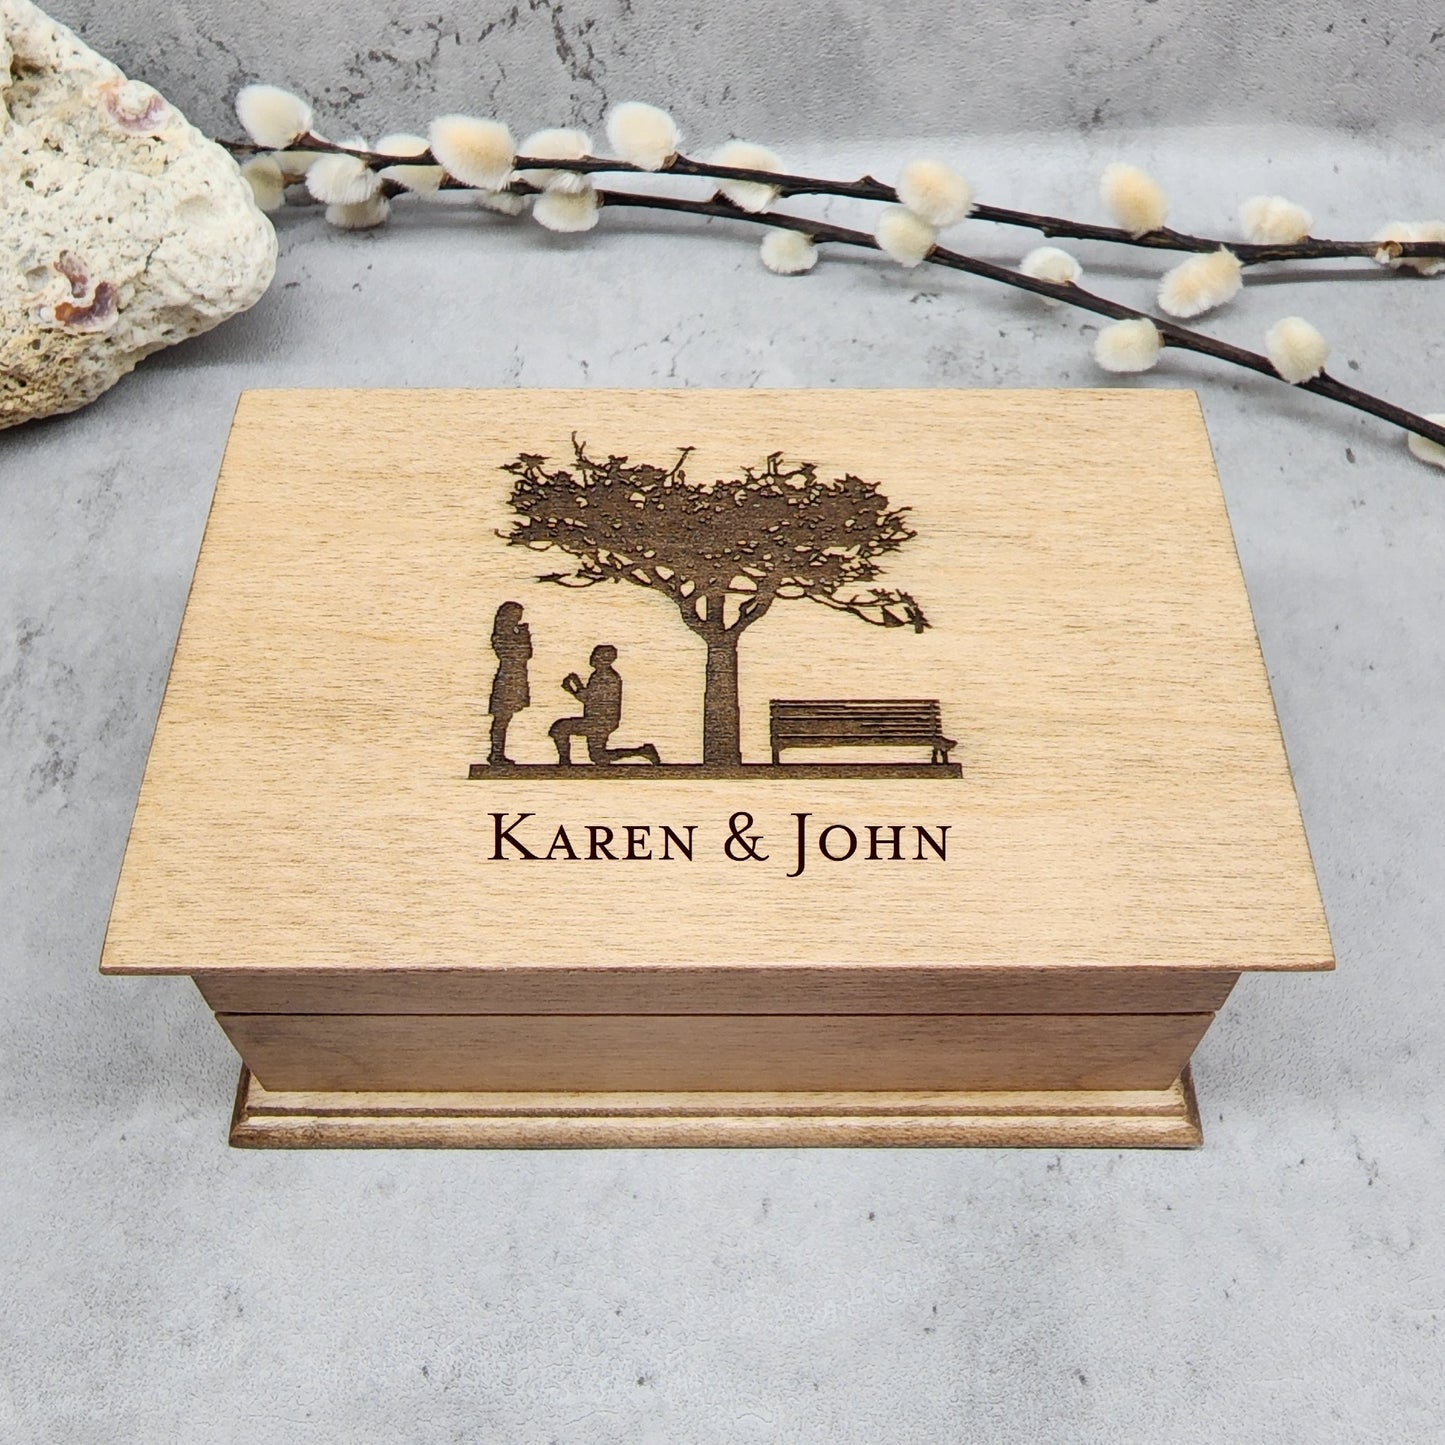 Proposal Jewelry Box with names engraved on top, choose color and song